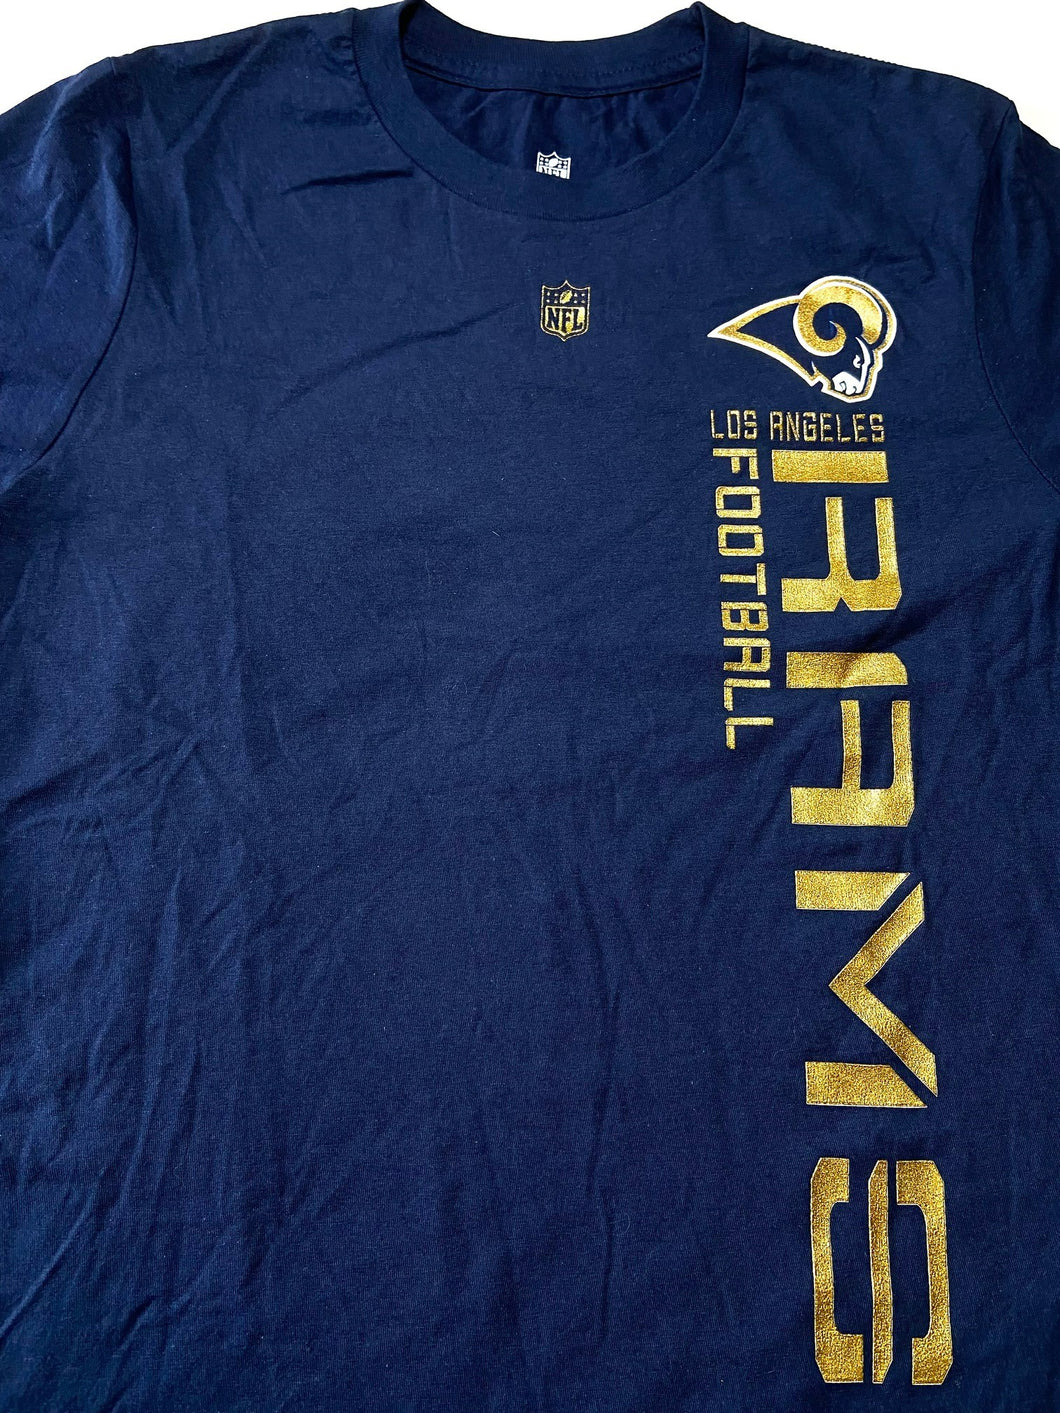 Los Angeles Rams 2013 NFL Vertical Print Blue Youth Large (14-16) T-Shirt By NFL Team Apparel